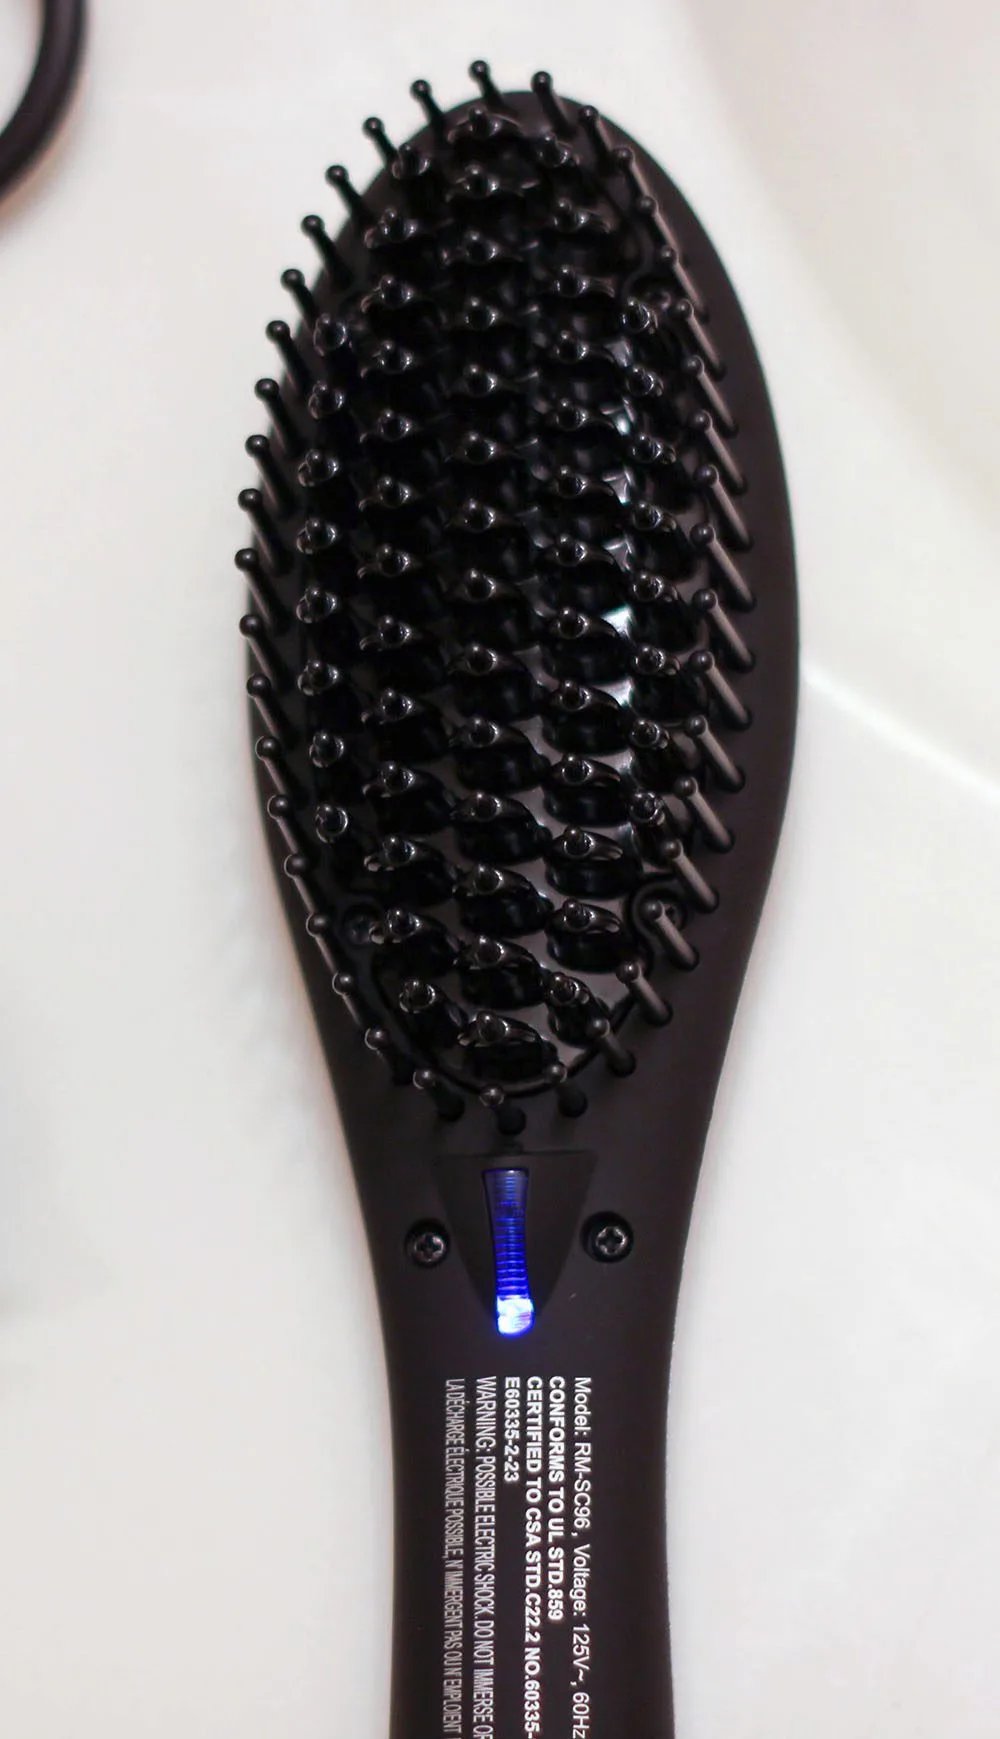 Heated hair brush for straightening and smoothing hair